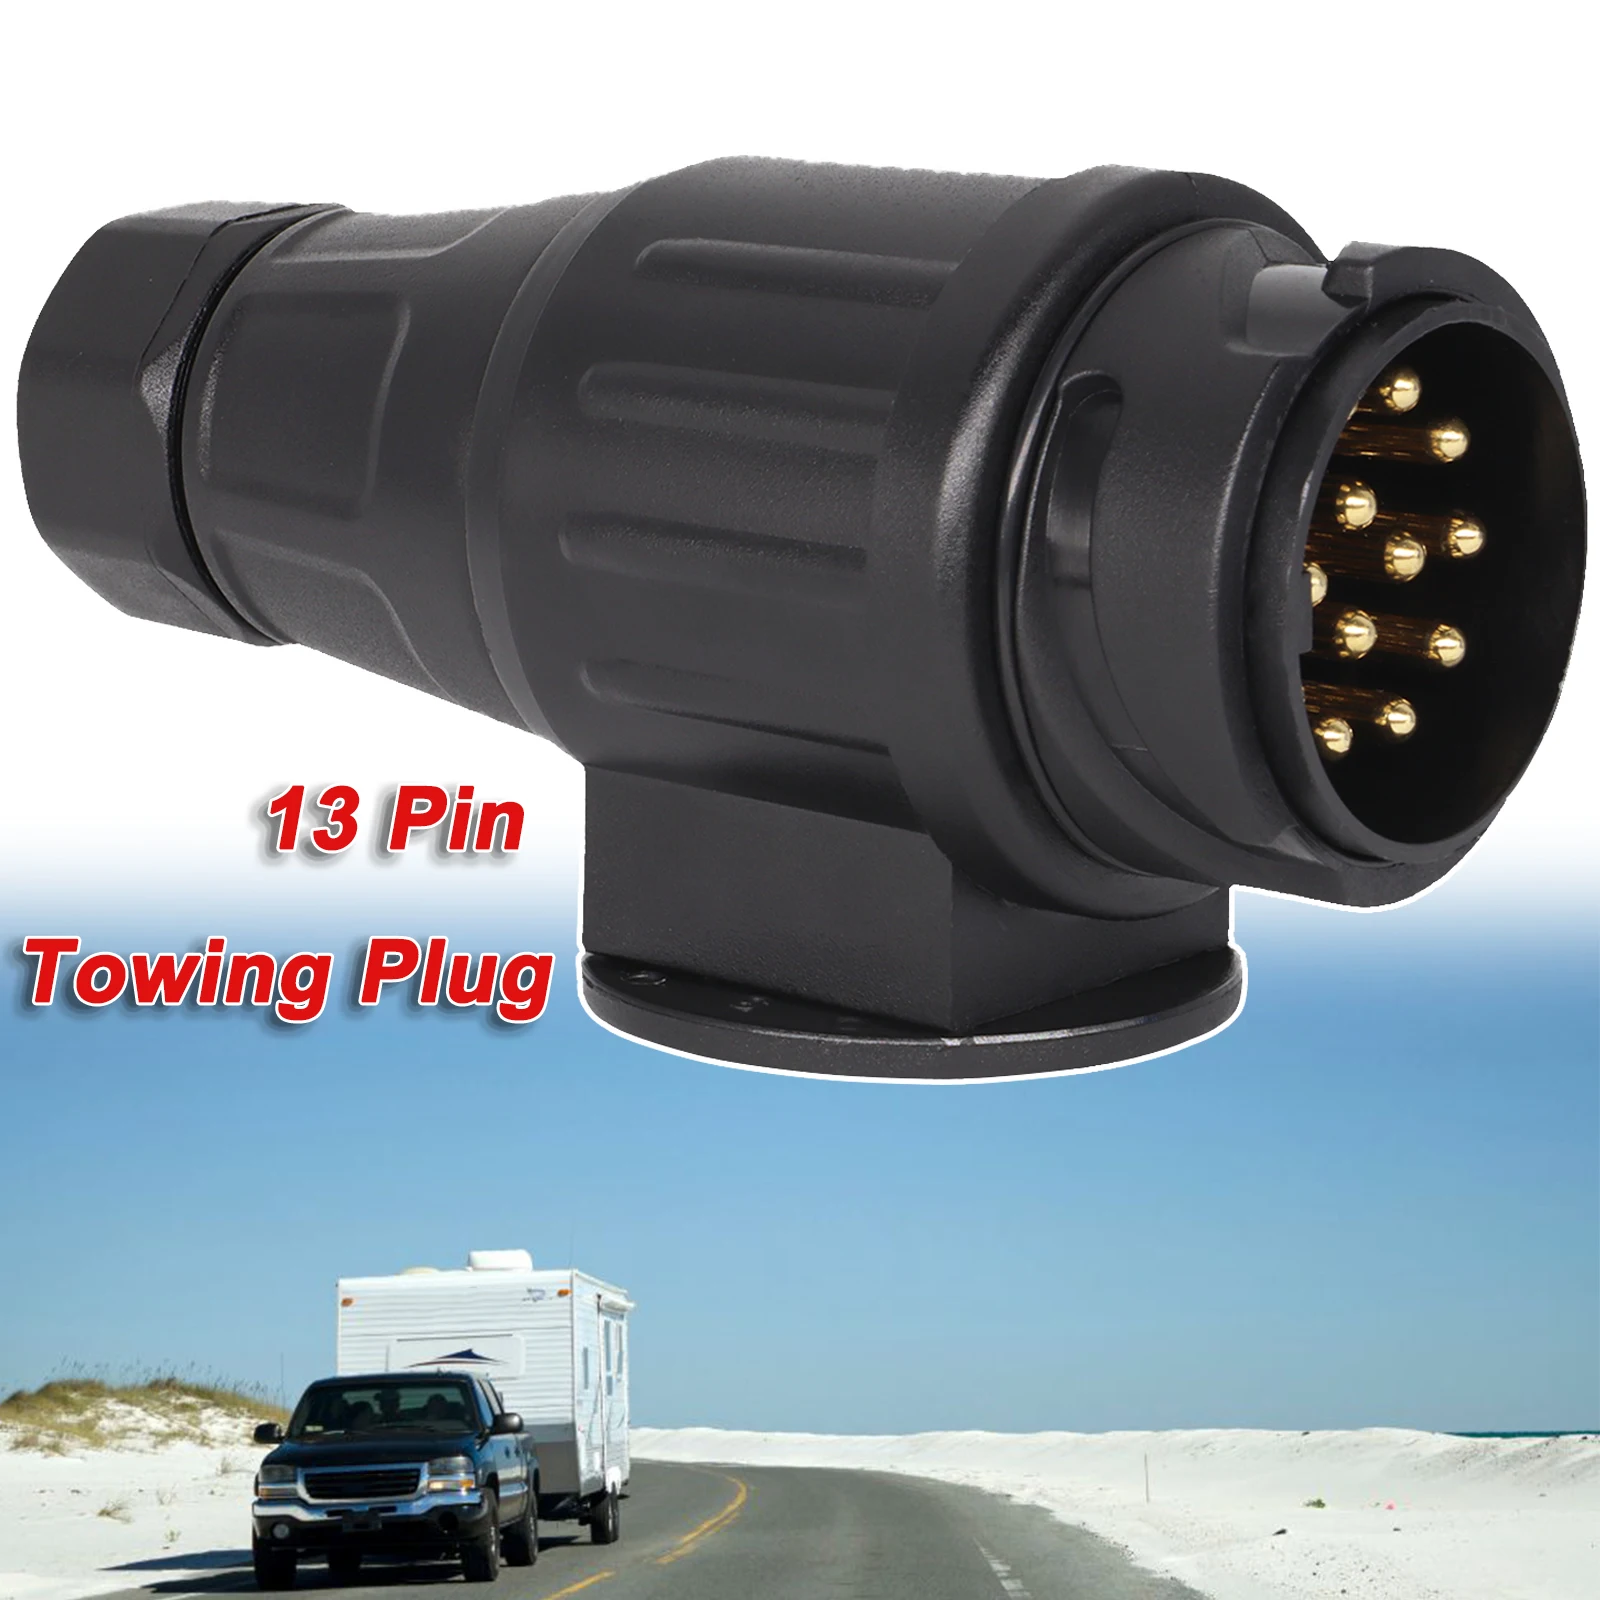 12V 13 Pin Trailer Plug Durable 13 Pole Electrical Caravan Wiring Connector Towing Bar Socket Adapter Car Truck RV Accessories hdmi compatible adapter durable 1080p 120hz plug and play hdmi compatible to displayport adapter computer accessories